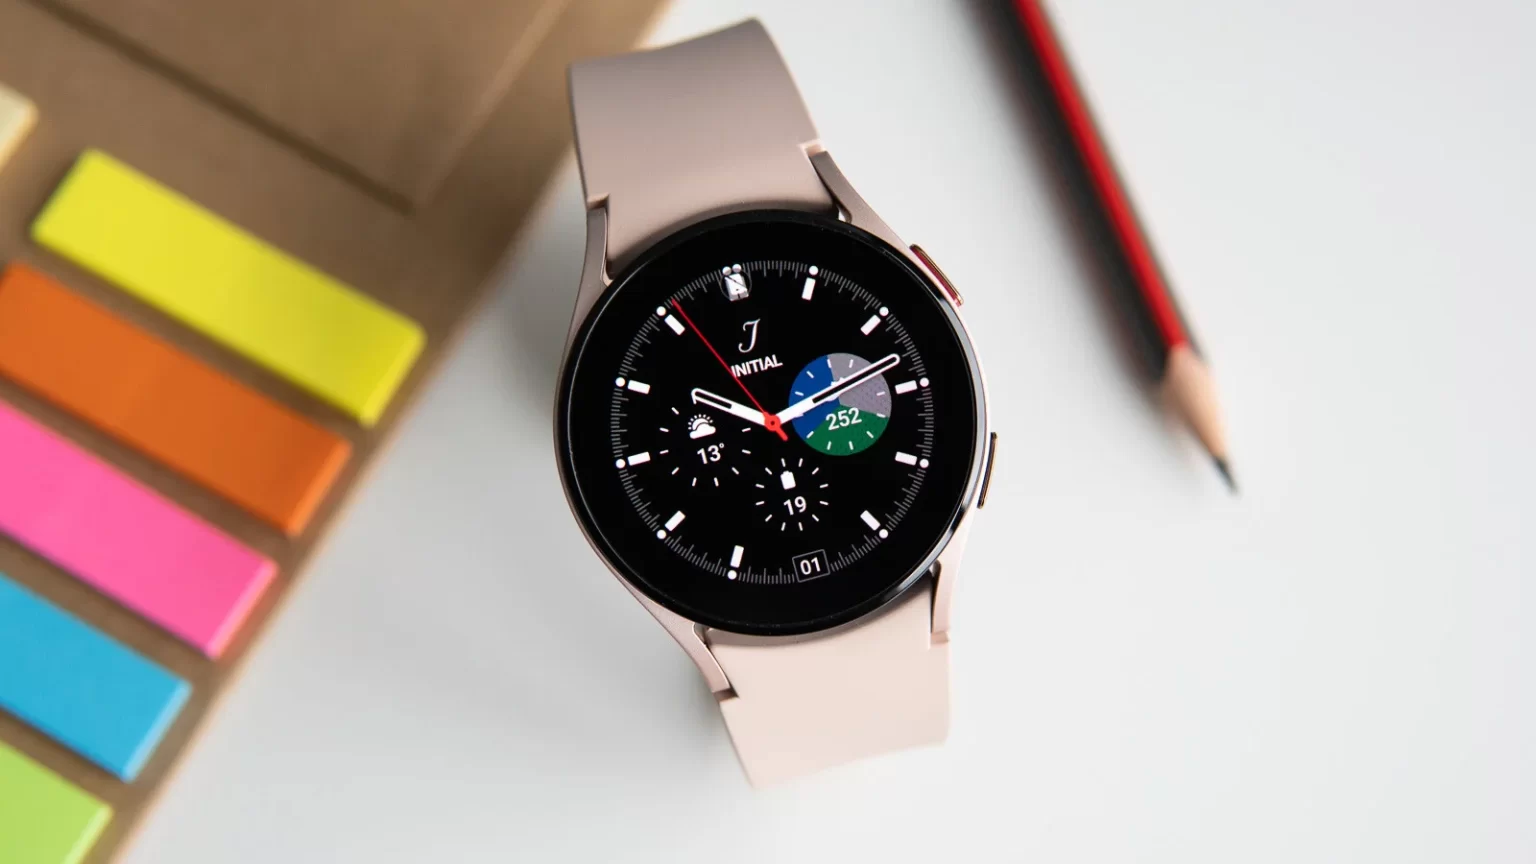 Samsung Galaxy Watch 4 Review 1536x864 - How to customize the side keys on your Samsung Galaxy Watch 4, and 5